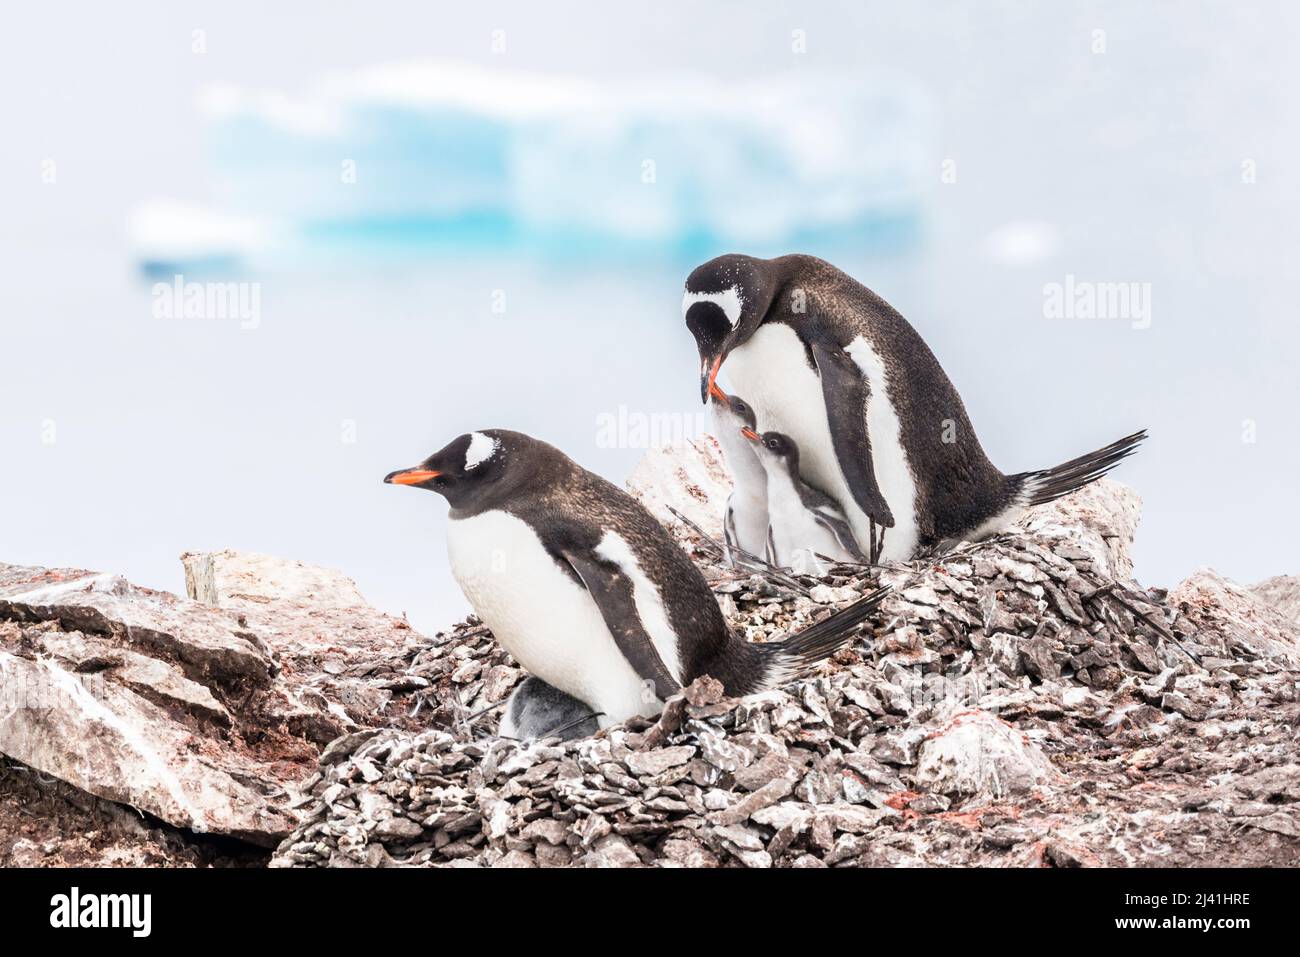 Gentoo penguins chicks (Pygoscelis papua) looking to be fed. Chicks not expected to survive as born too late in season. Late summer, Antarctica Stock Photo